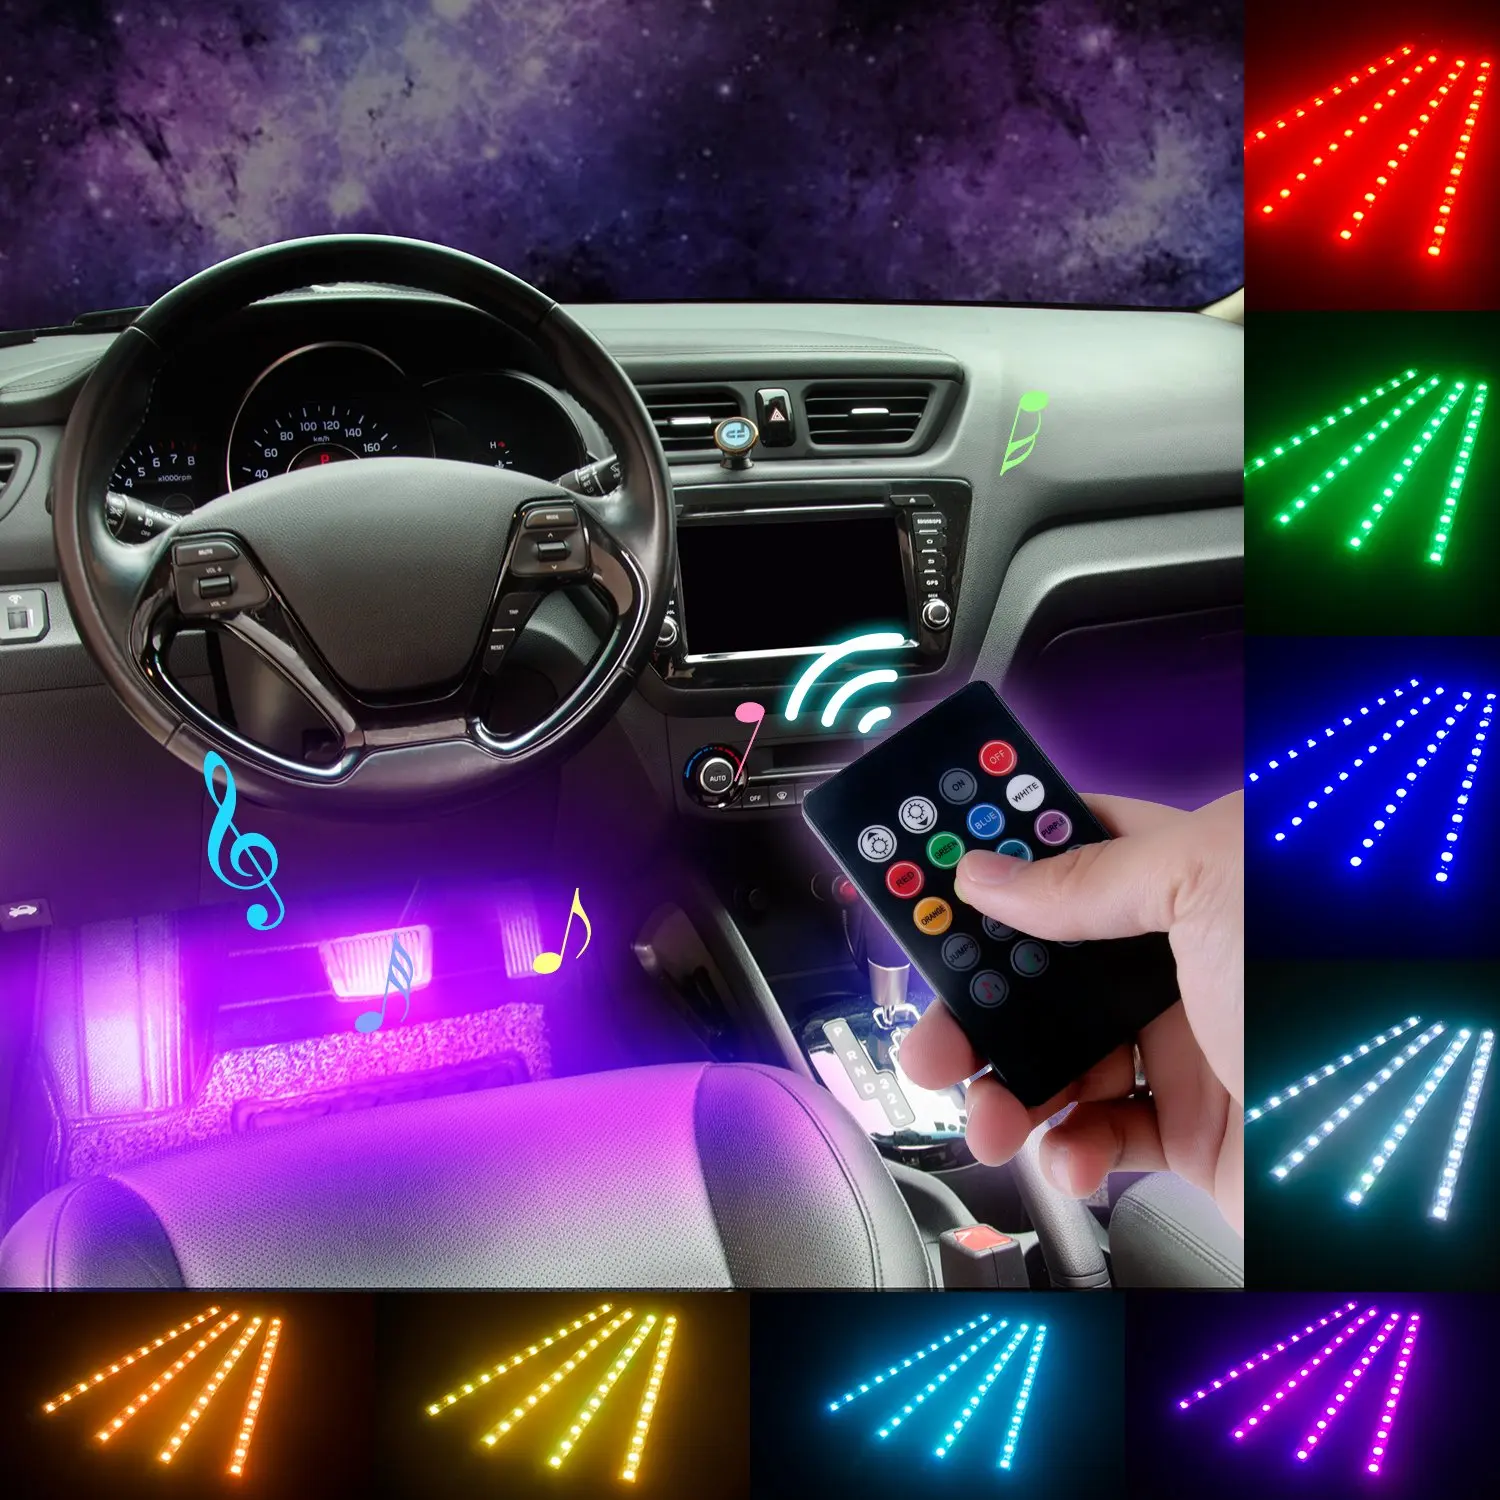 72 XBRN Car LED Strip Lights,4pcs 72 LED Multicolor Music Car Interior Atmosphere Lights Under Dash Lighting Kit with Sound Active Function and Wireless Remote Control 